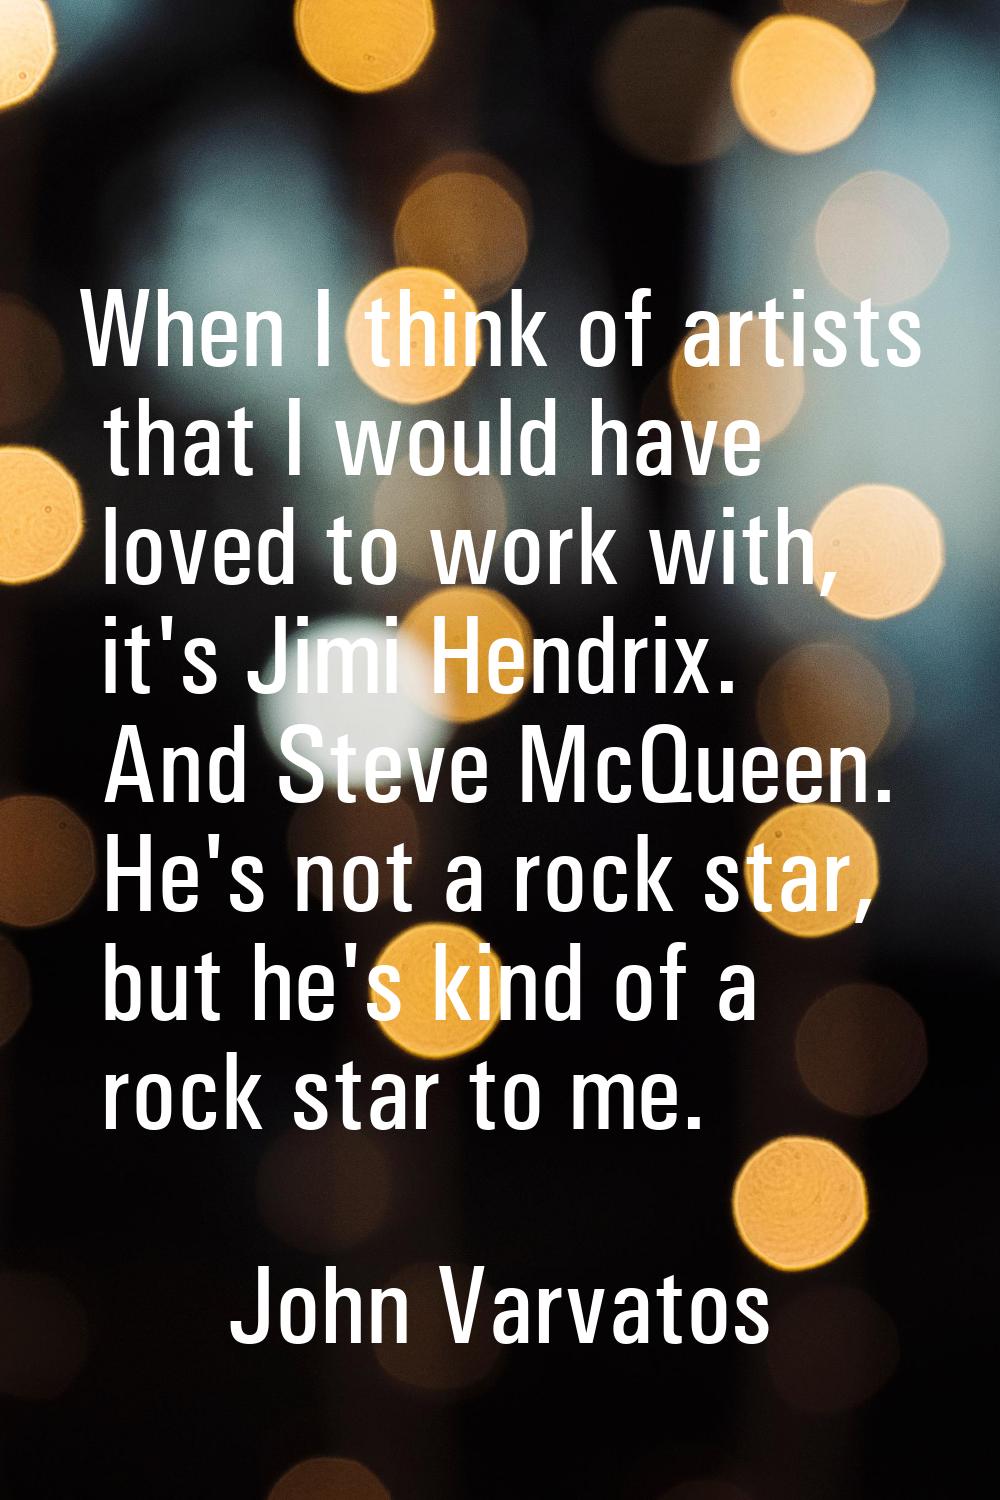 When I think of artists that I would have loved to work with, it's Jimi Hendrix. And Steve McQueen.